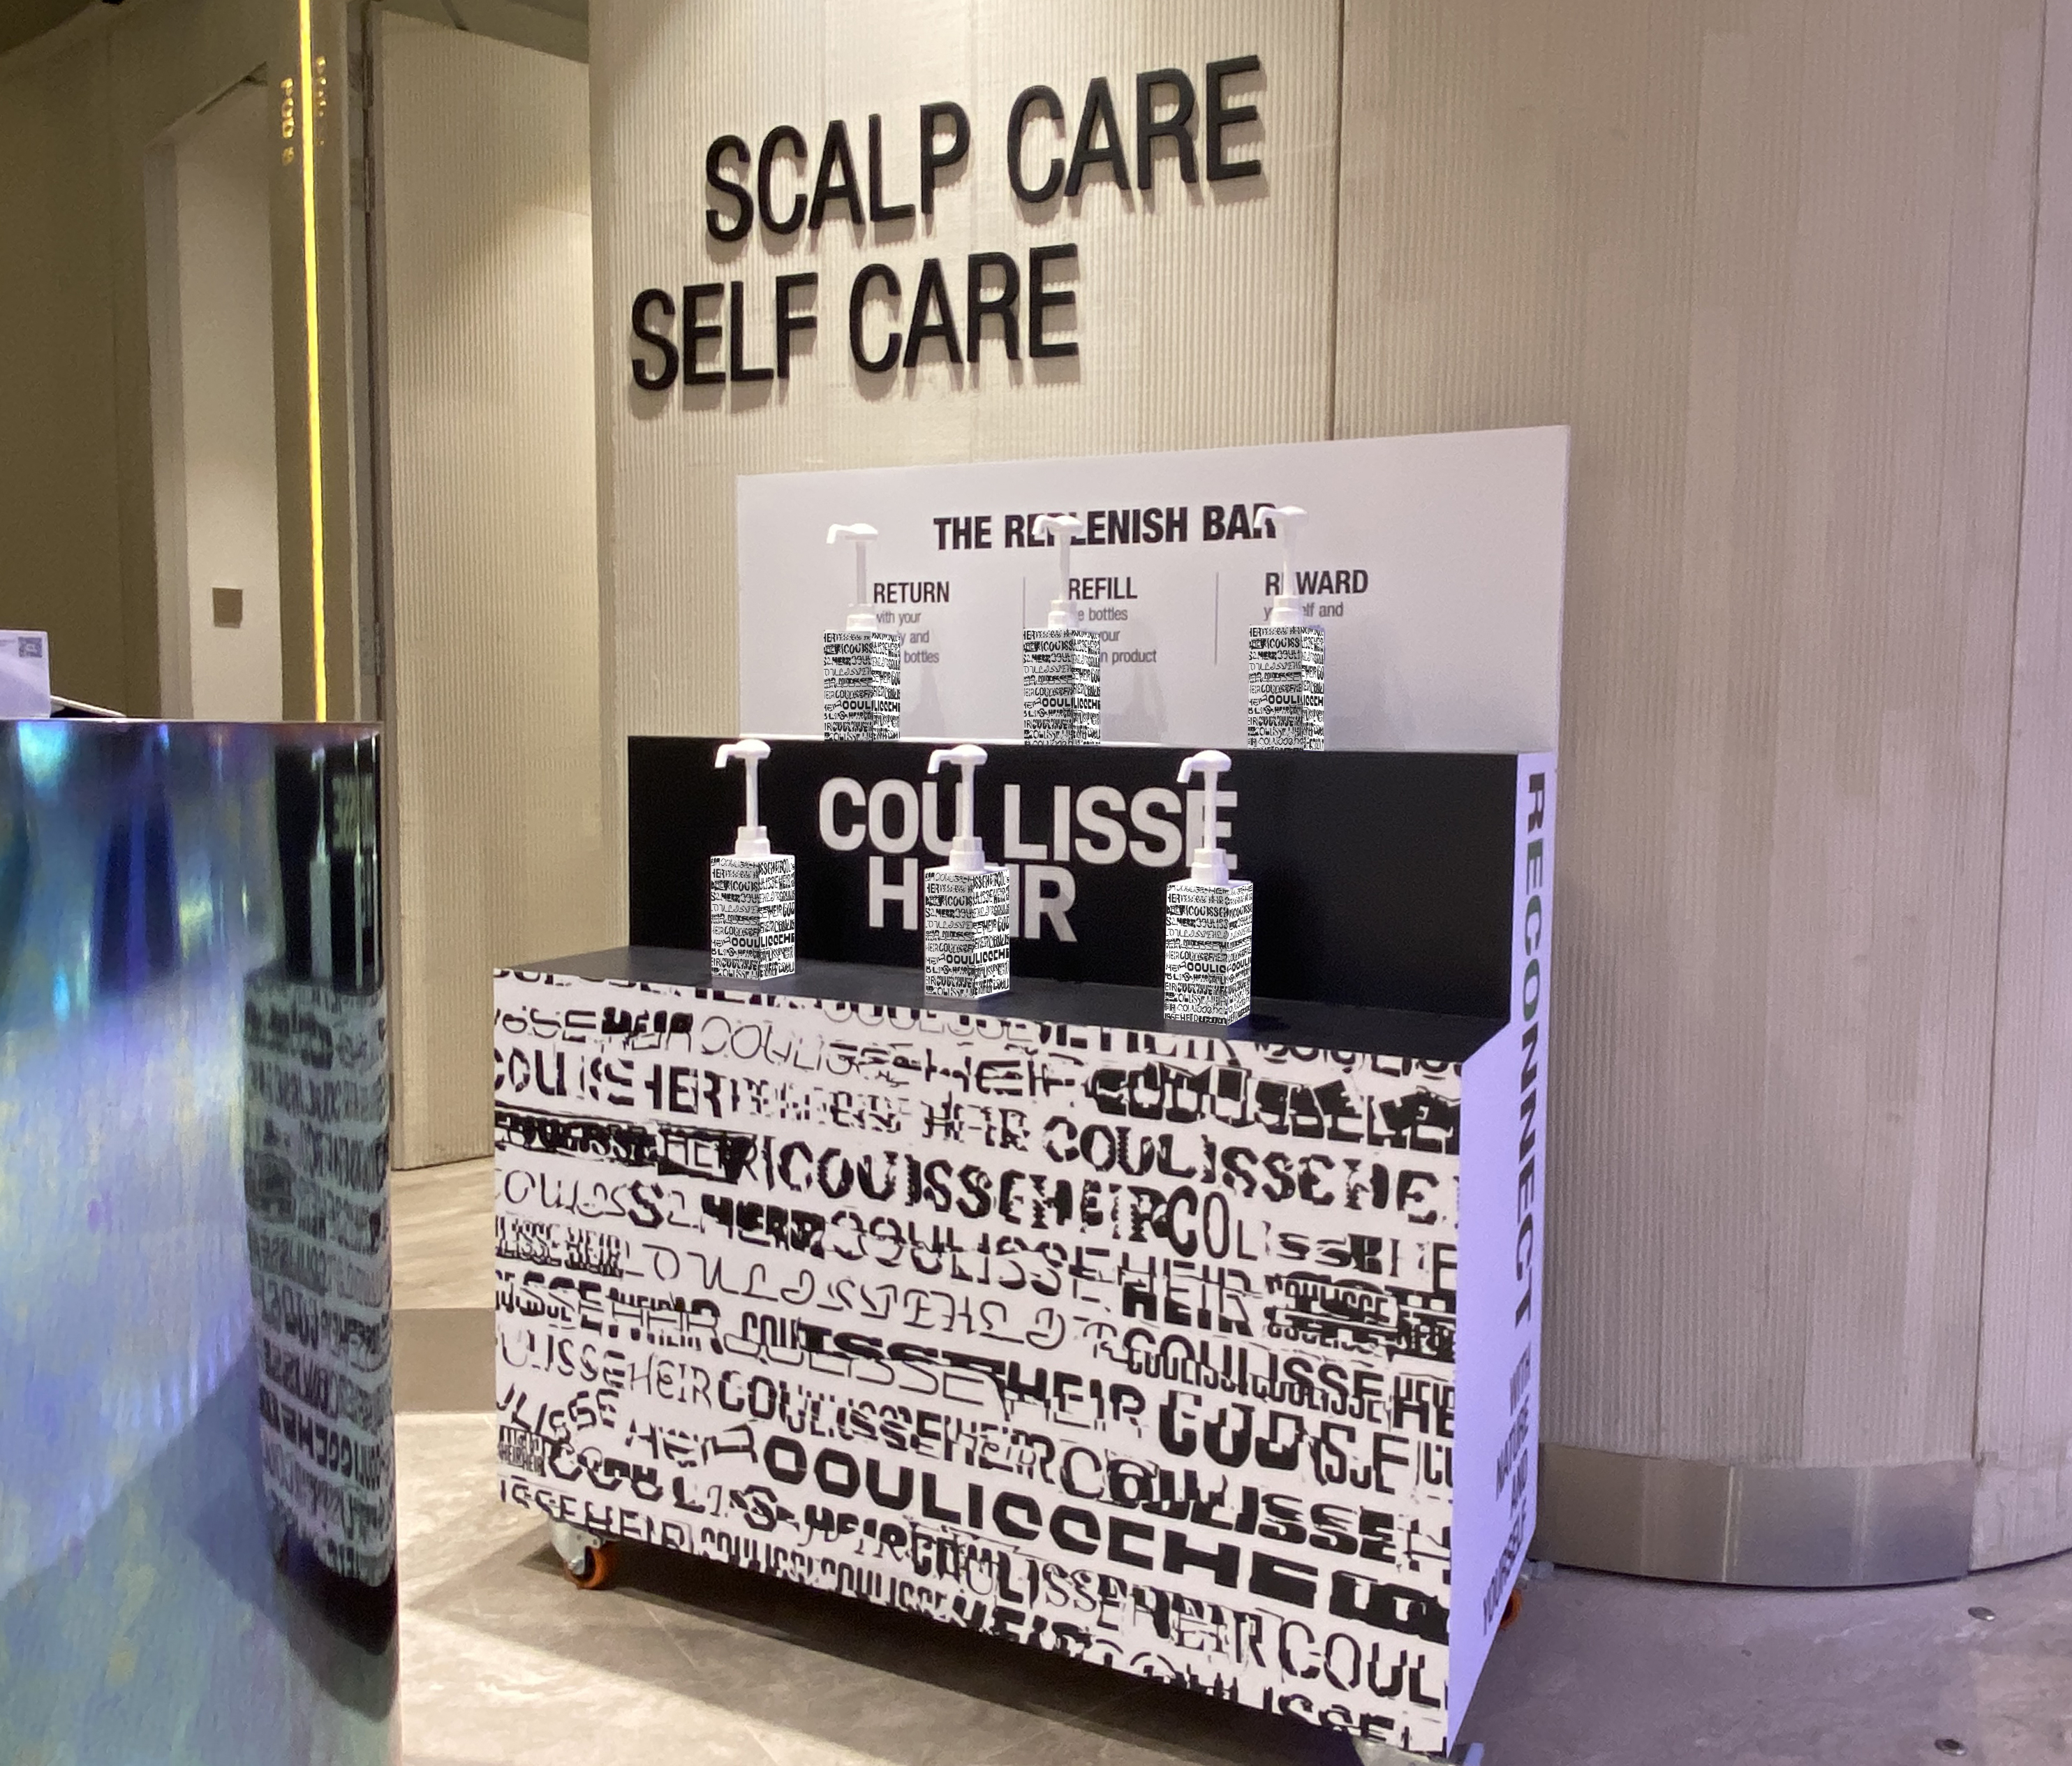   Coulisse Heir, the advocate for luxury and scalp health, launches “The Replenish Bar”